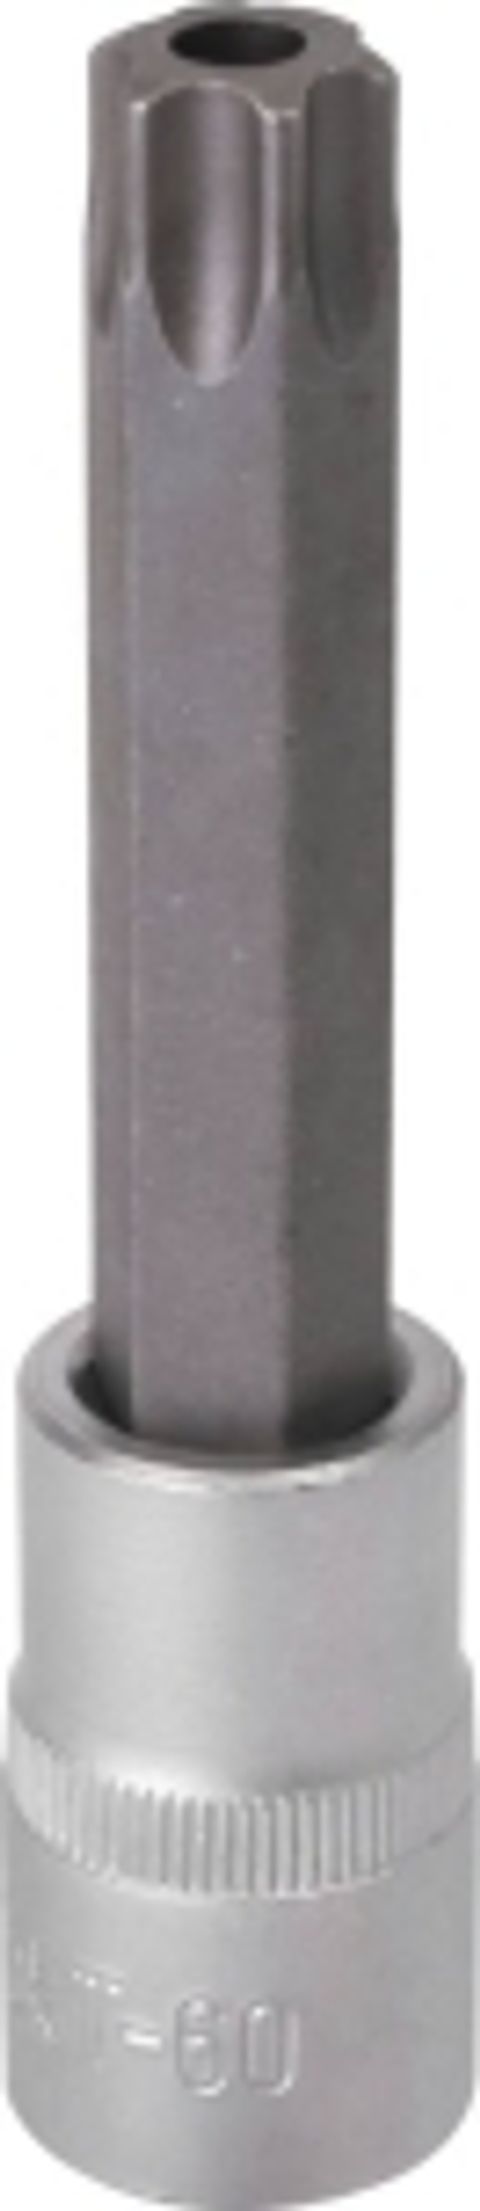 Douille 100mm embout torx perce 1/2 taille t55 *dt* Embouts